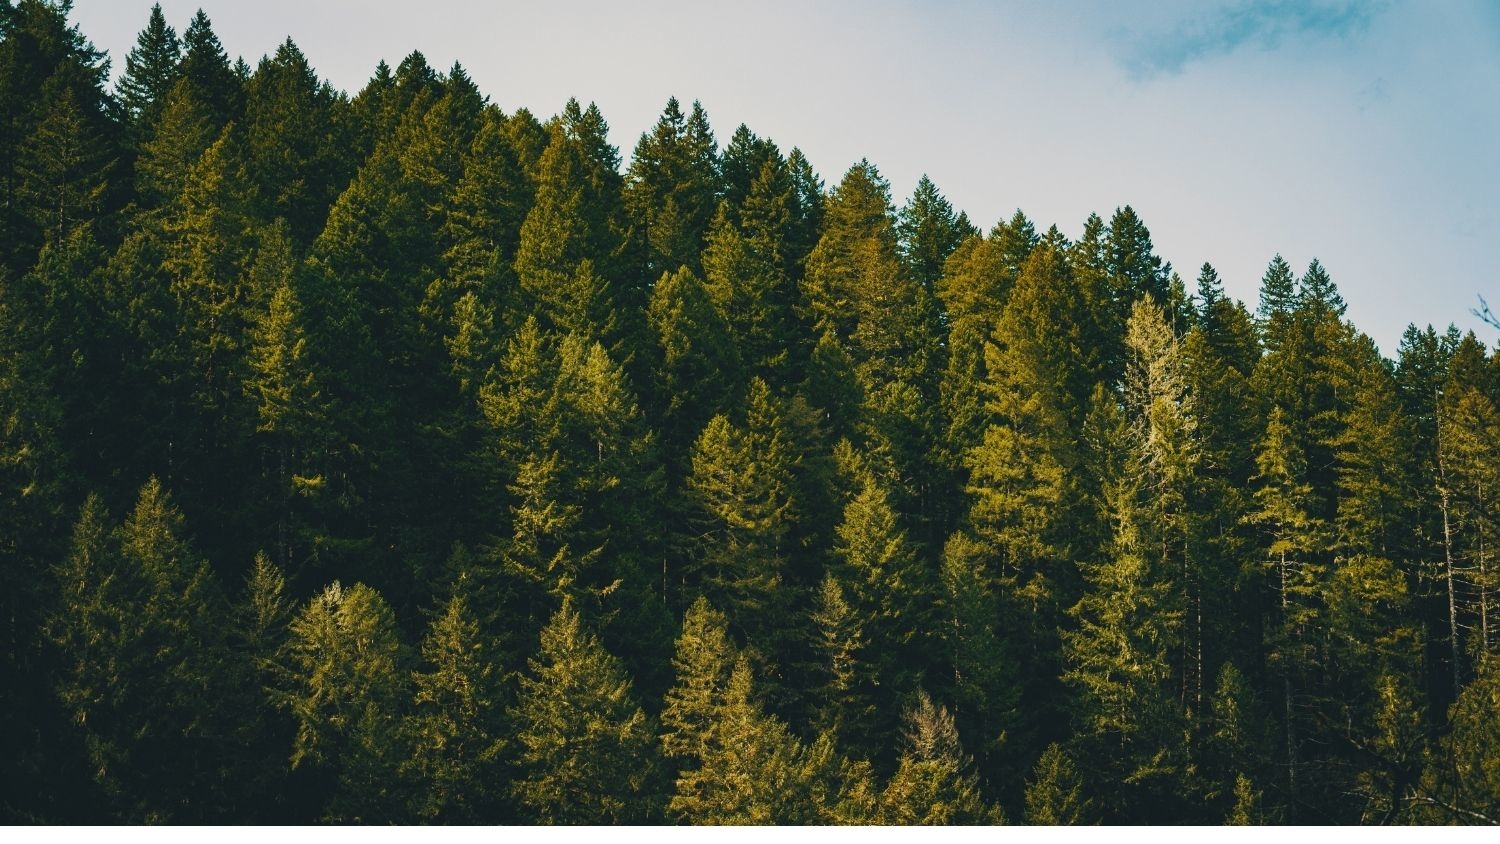 A stand of pine trees in a forest - Timber Demand Could Help Save Forests - College of Natural Resources News NC State University